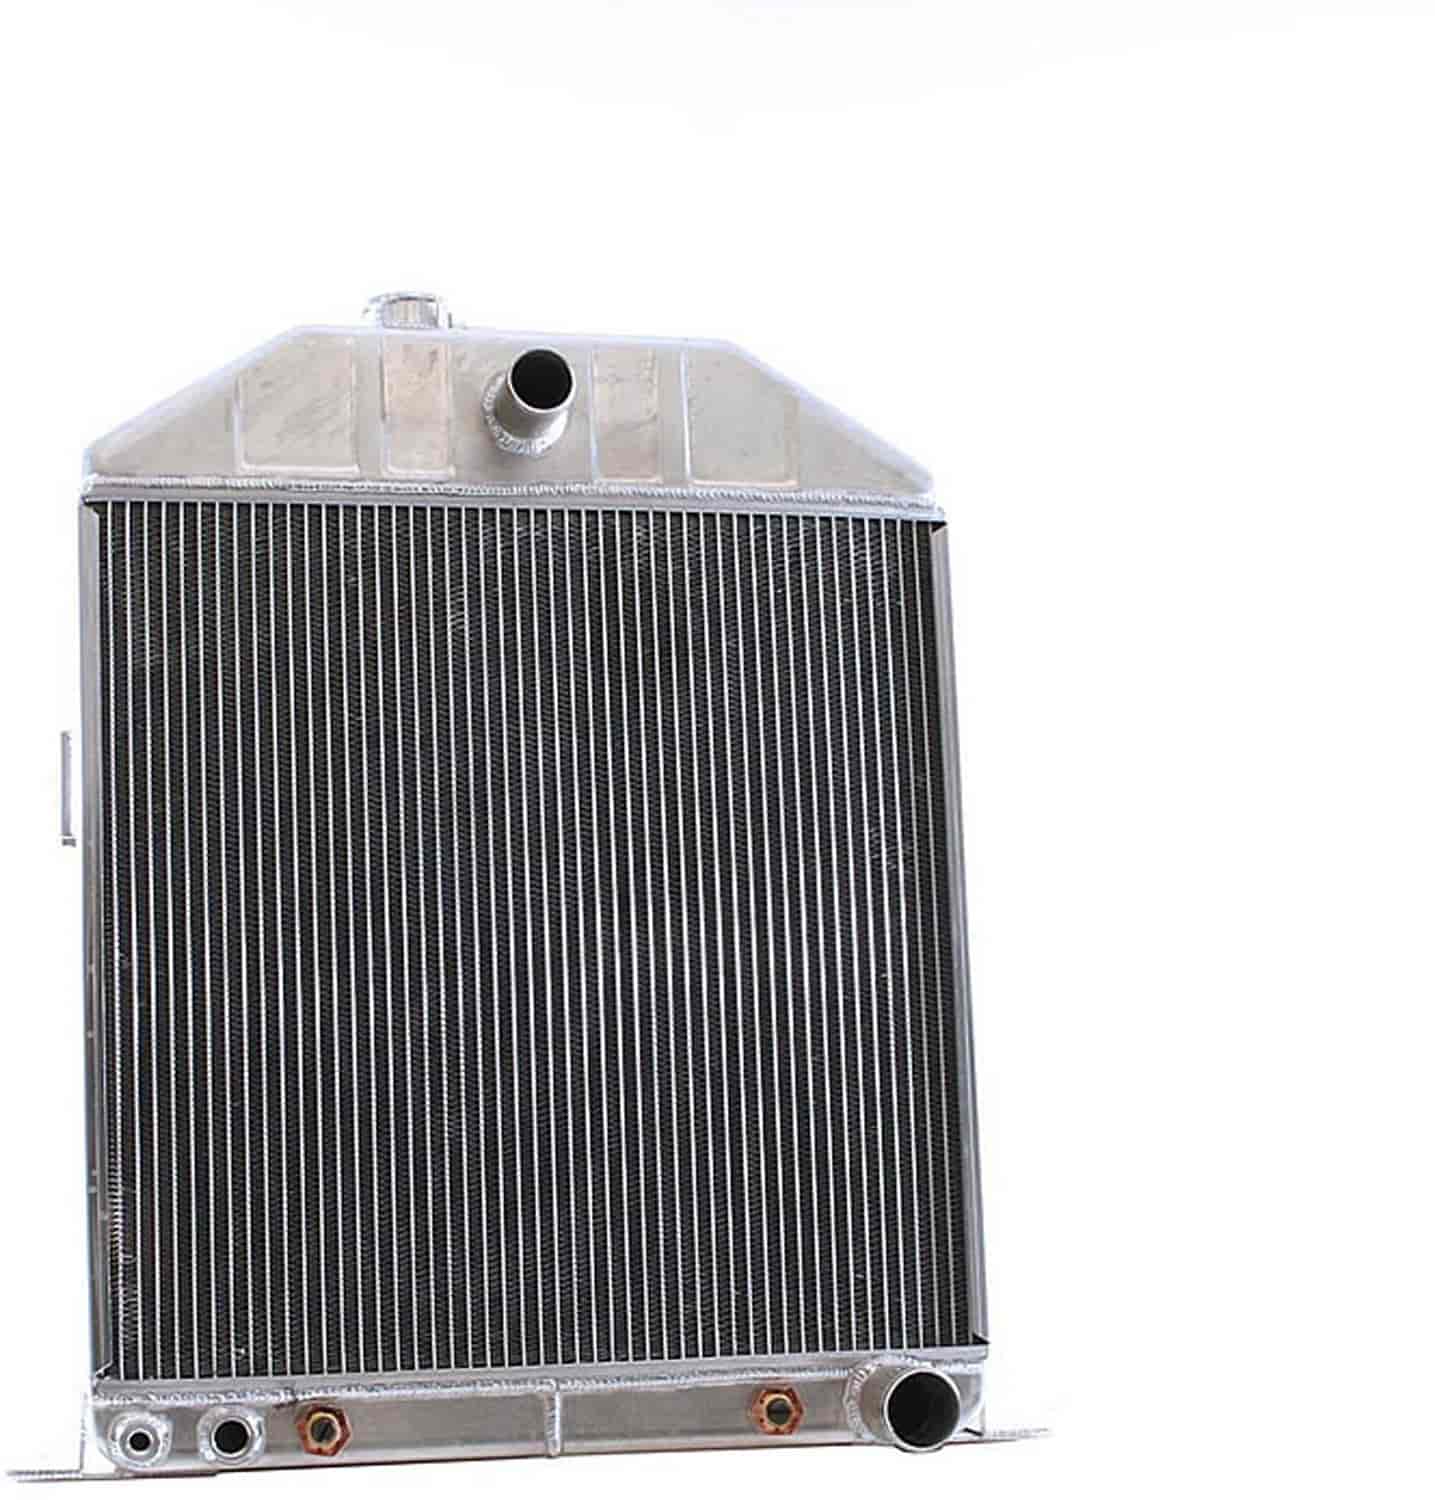 ExactFit Radiator for 1942-1948 Ford/Mercury Car with Early GM Engine